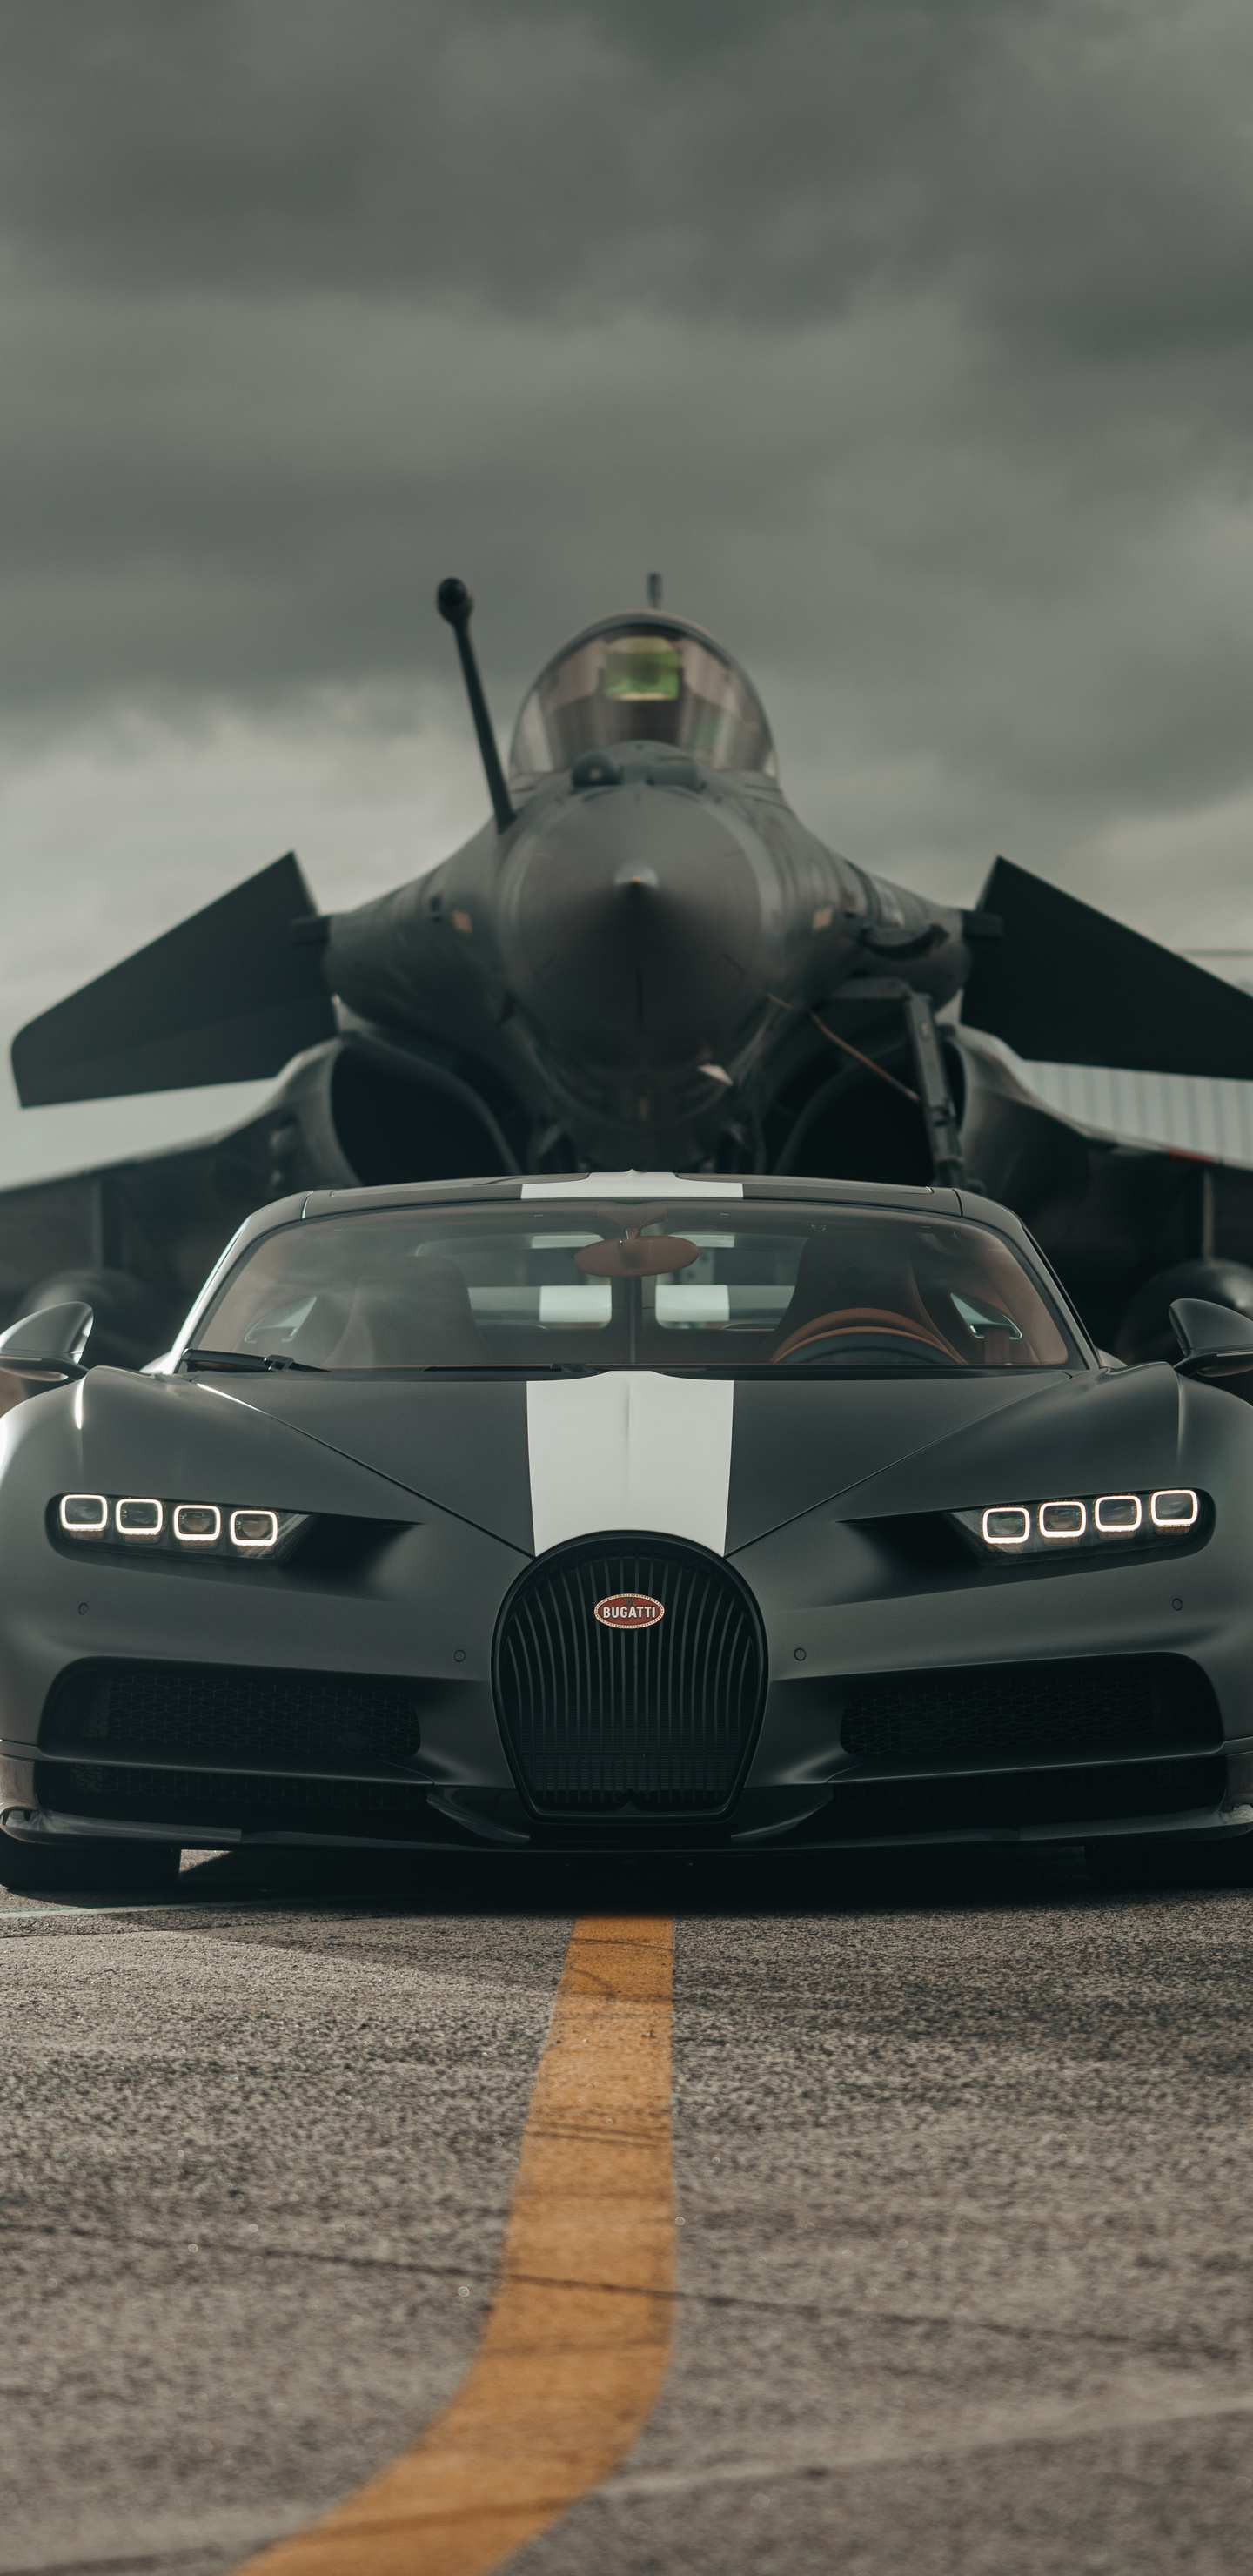 1440x2960 Bugatti Chiron Meets Dassault Rafale Marine Jet 8k Samsung Galaxy  Note 9,8, S9,S8,S8+ QHD HD 4k Wallpapers, Images, Backgrounds, Photos and  Pictures